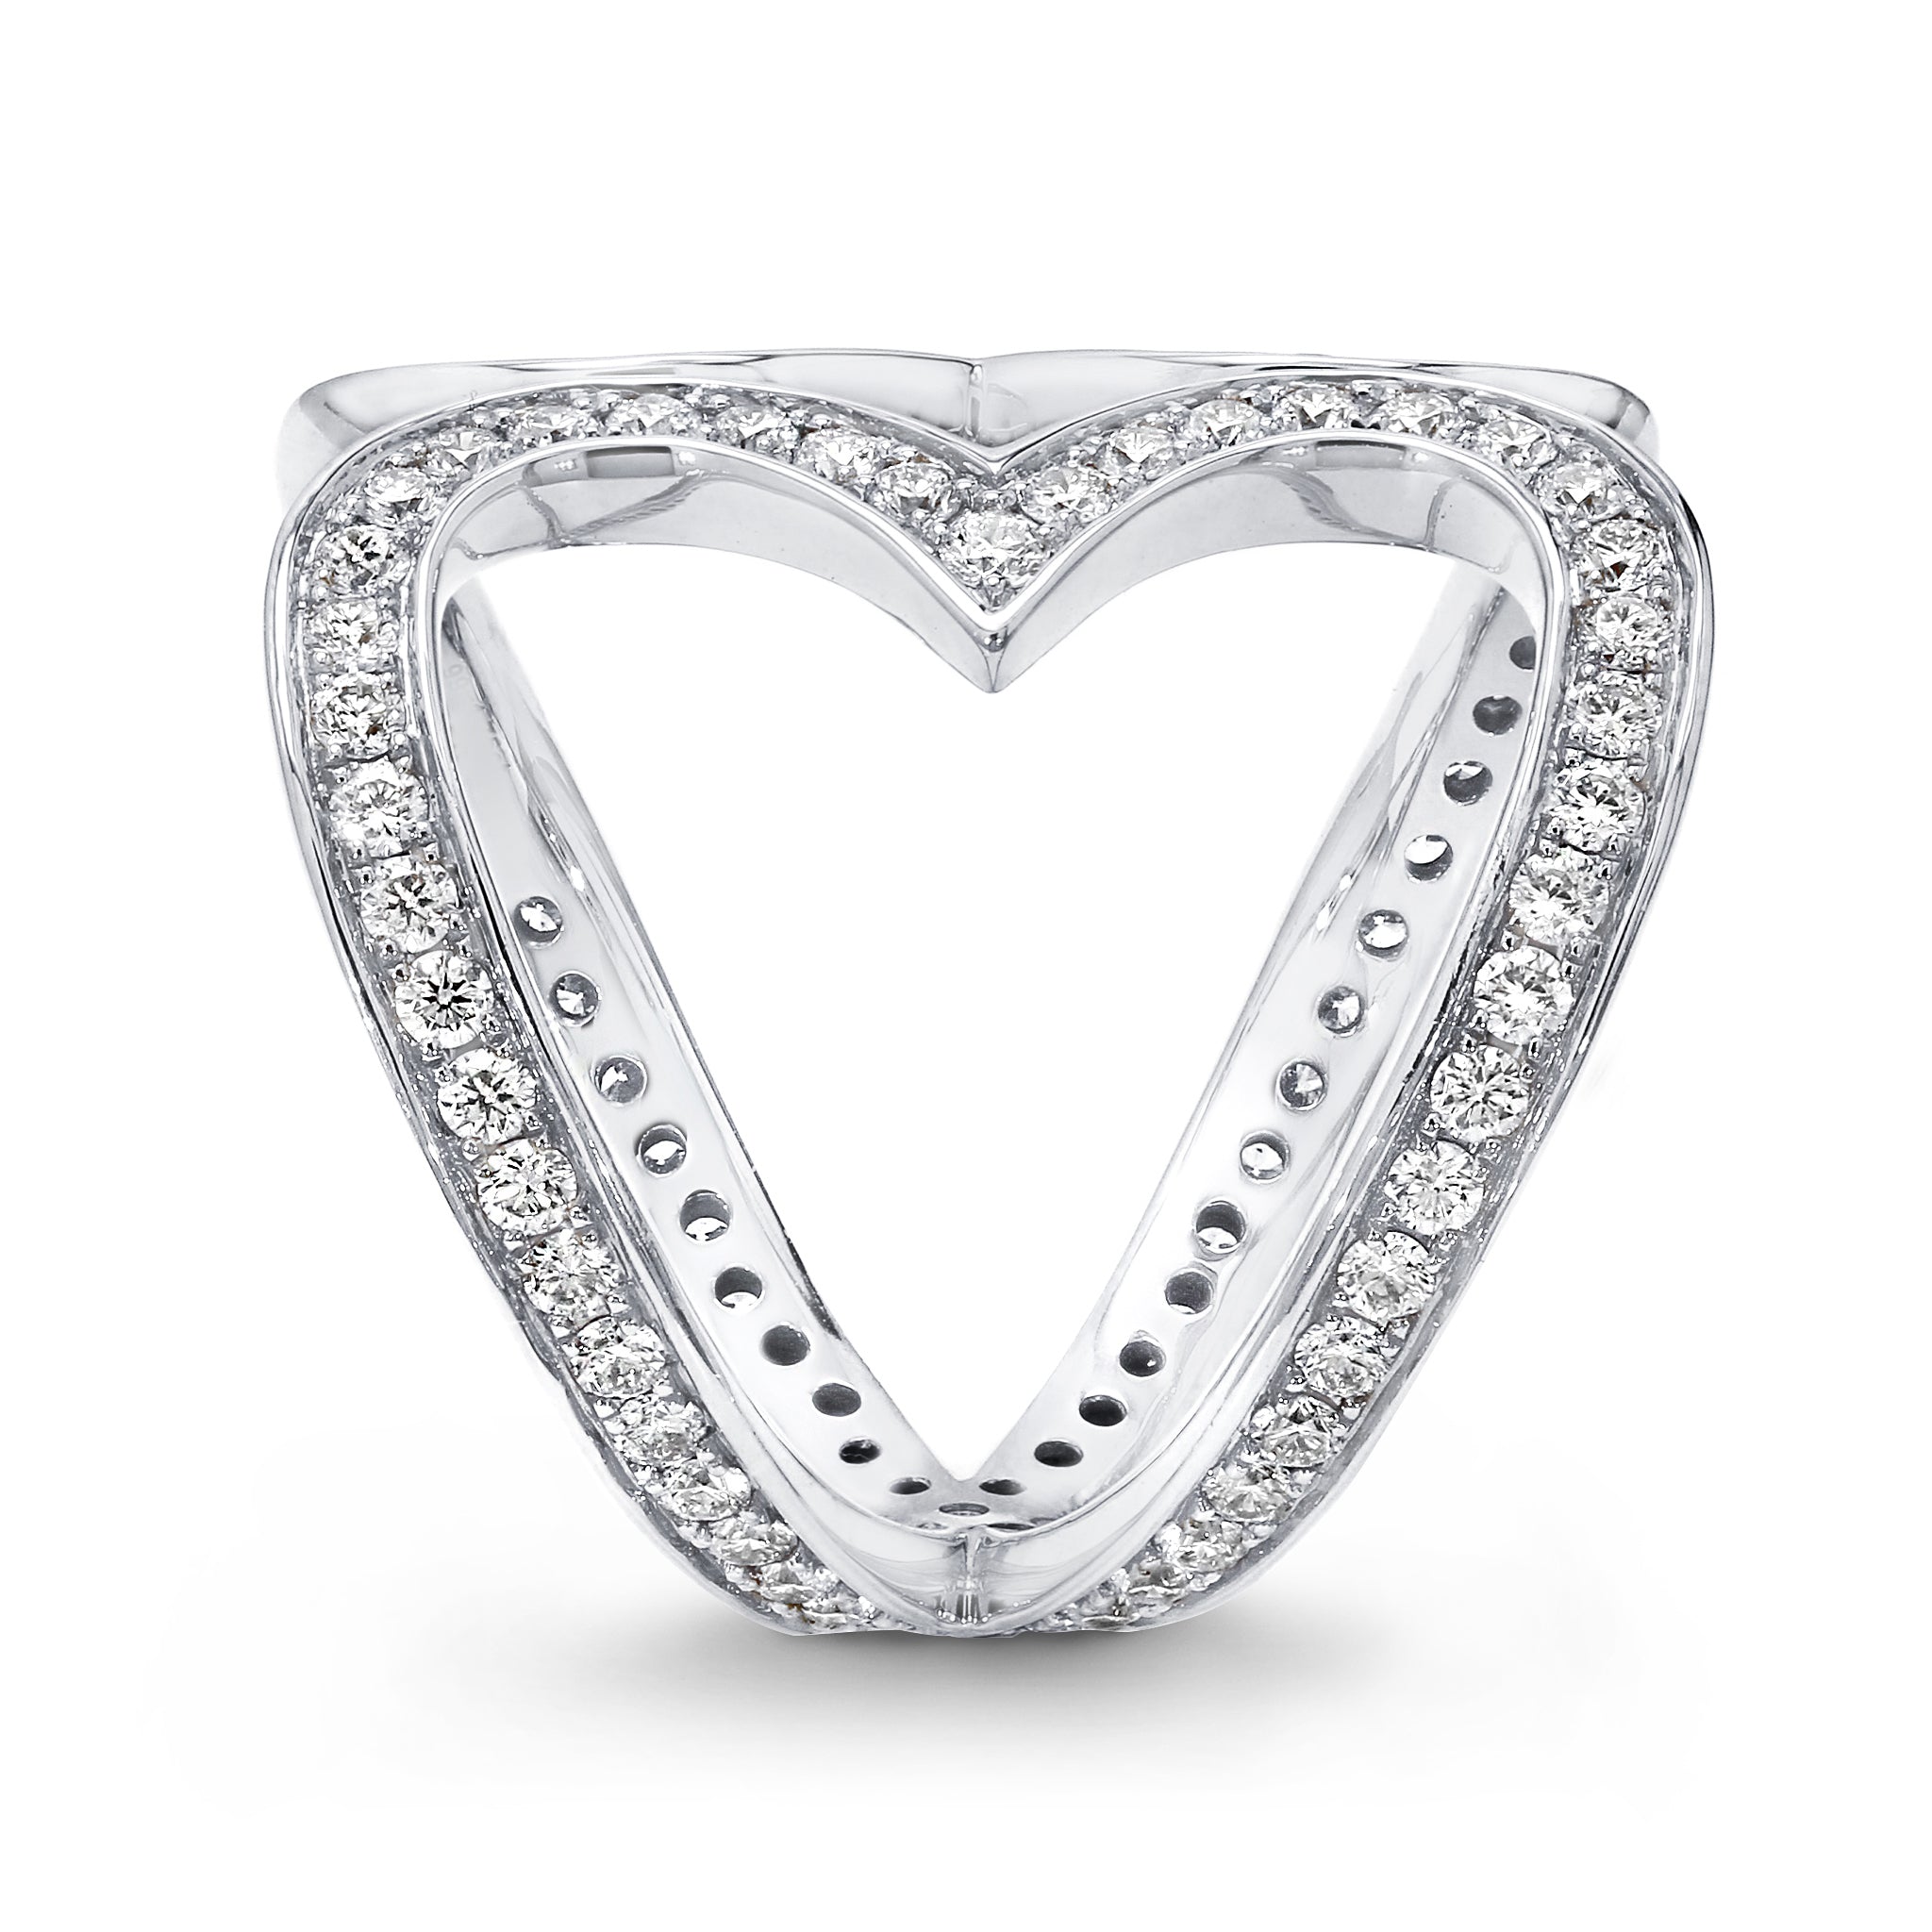 Shimansky - Two Hearts Diamond Statement Ring 1.70ct crafted in 18K White Gold